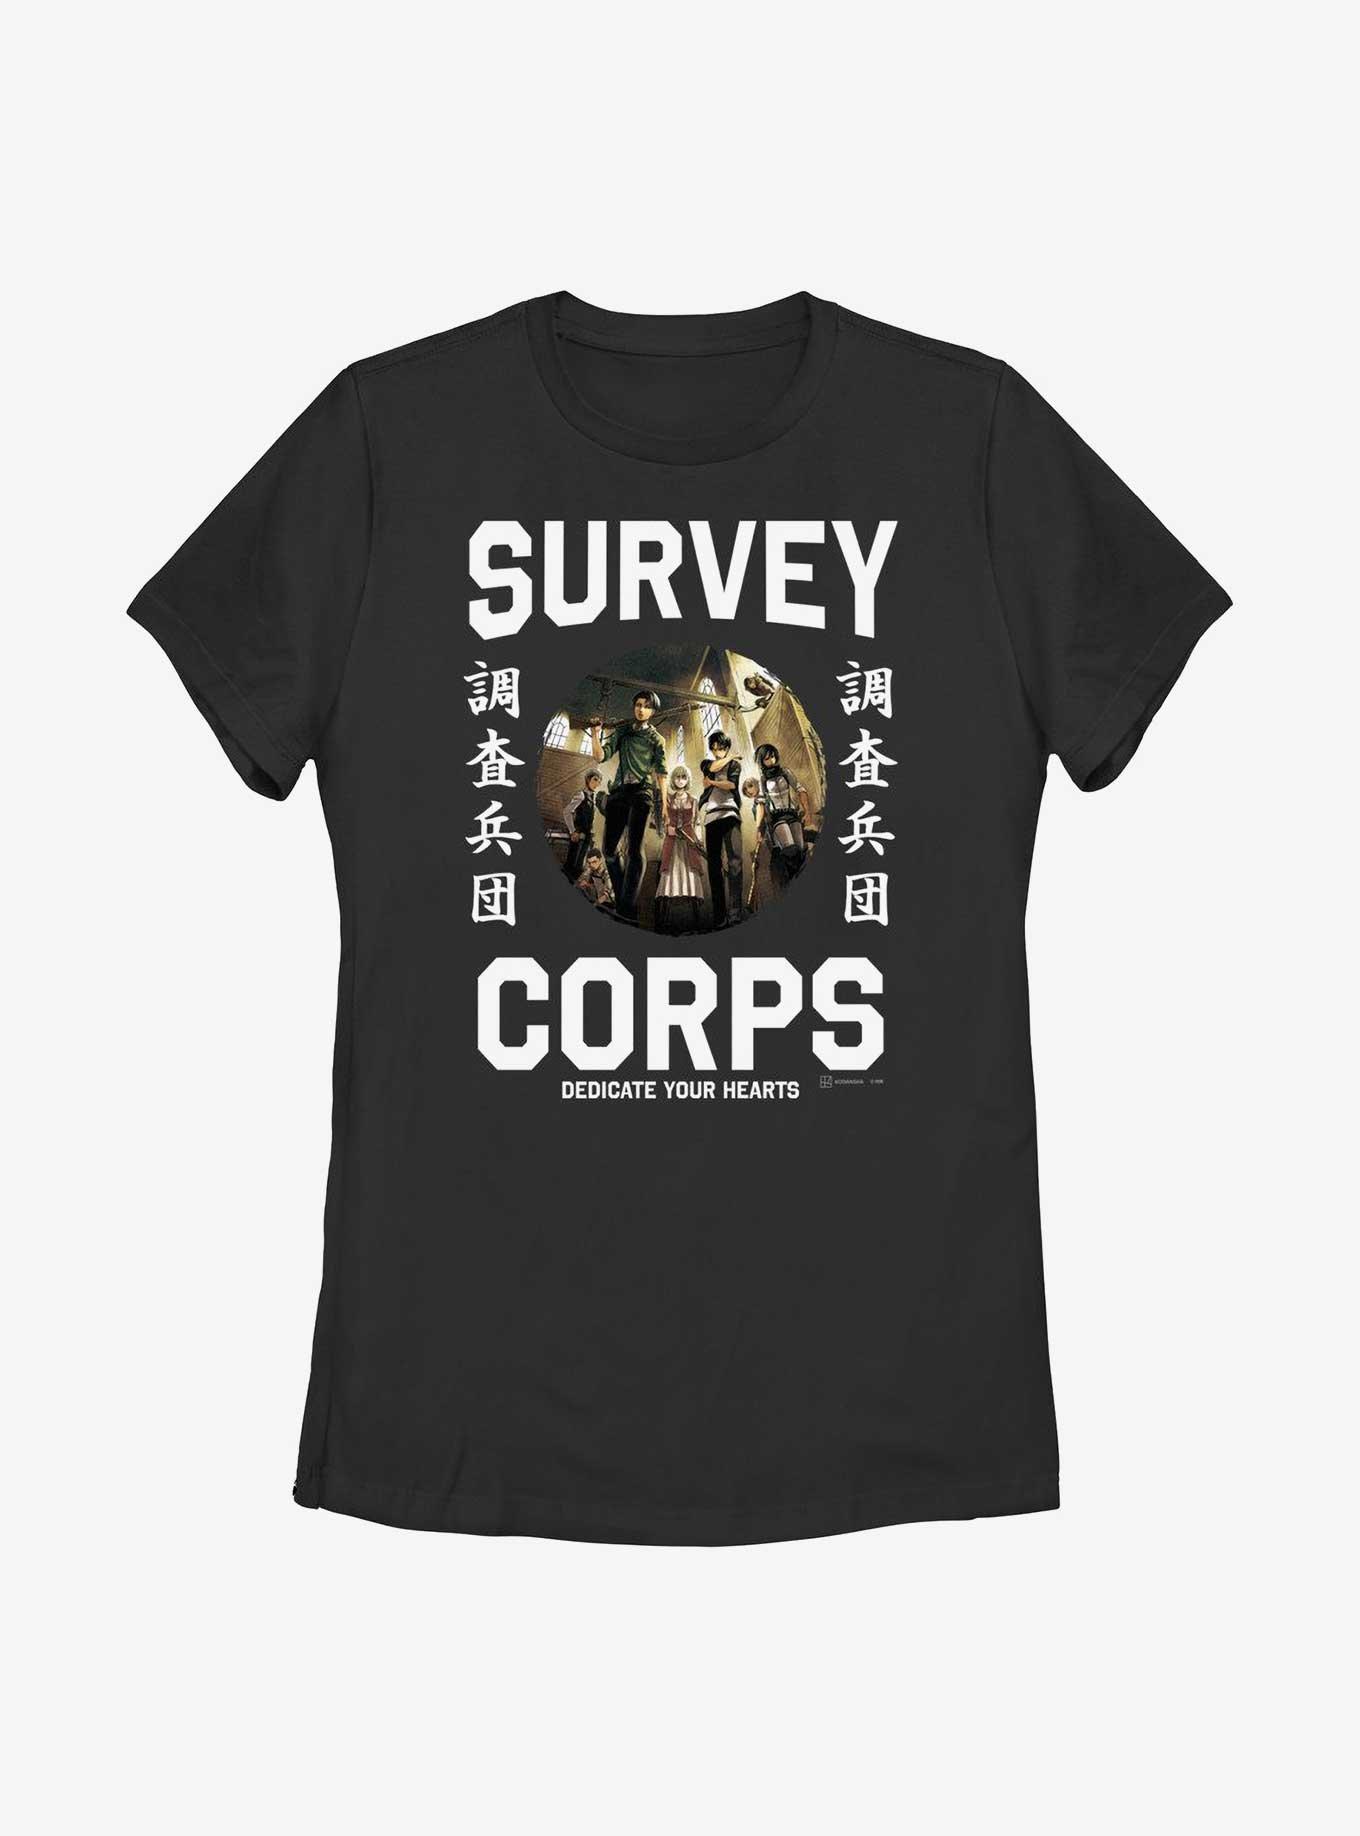 Attack on Titan Survey Corps Dedicate Your Hearts Womens T-Shirt, BLACK, hi-res